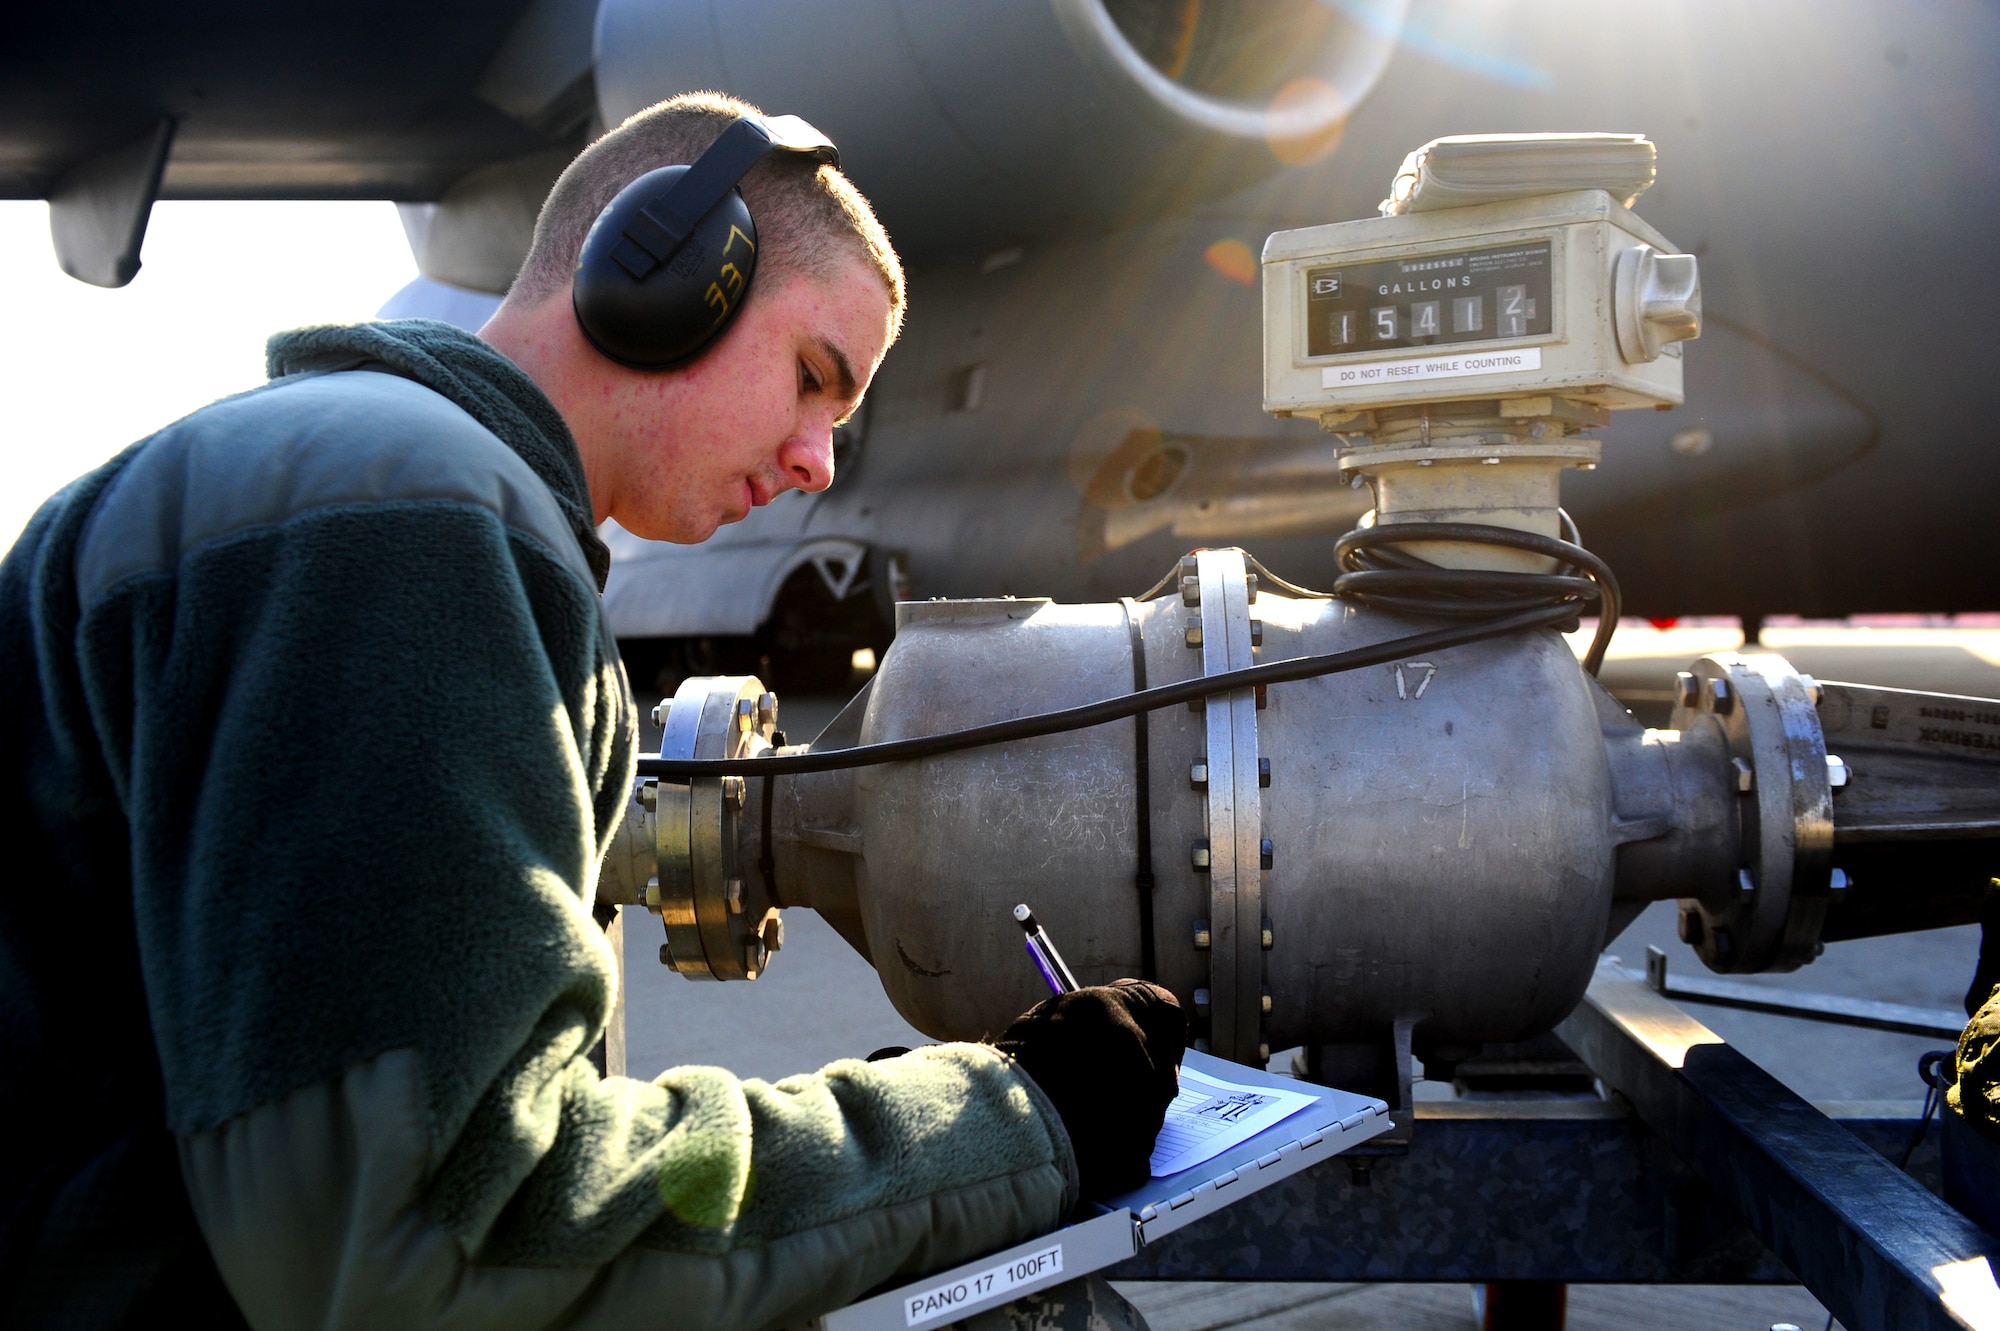 U.S. Air Force Airman 1st Class Ryan Lee, 86th Logistics Readiness Squadron
fuels distribution mobile operator, documents issue quantity after refueling
a C-17 Globemaster III, Ramstein Air Base, Germany, March 6, 2012. Airmen
assigned to the fuels management flight are responsible for refueling all aircraft
at Ramstein, 24-hours a day, seven days a week; issuing more than 130
million gallons of fuel in fiscal year 2011. (U.S. Air Force photo/Airman Brea
Miller)